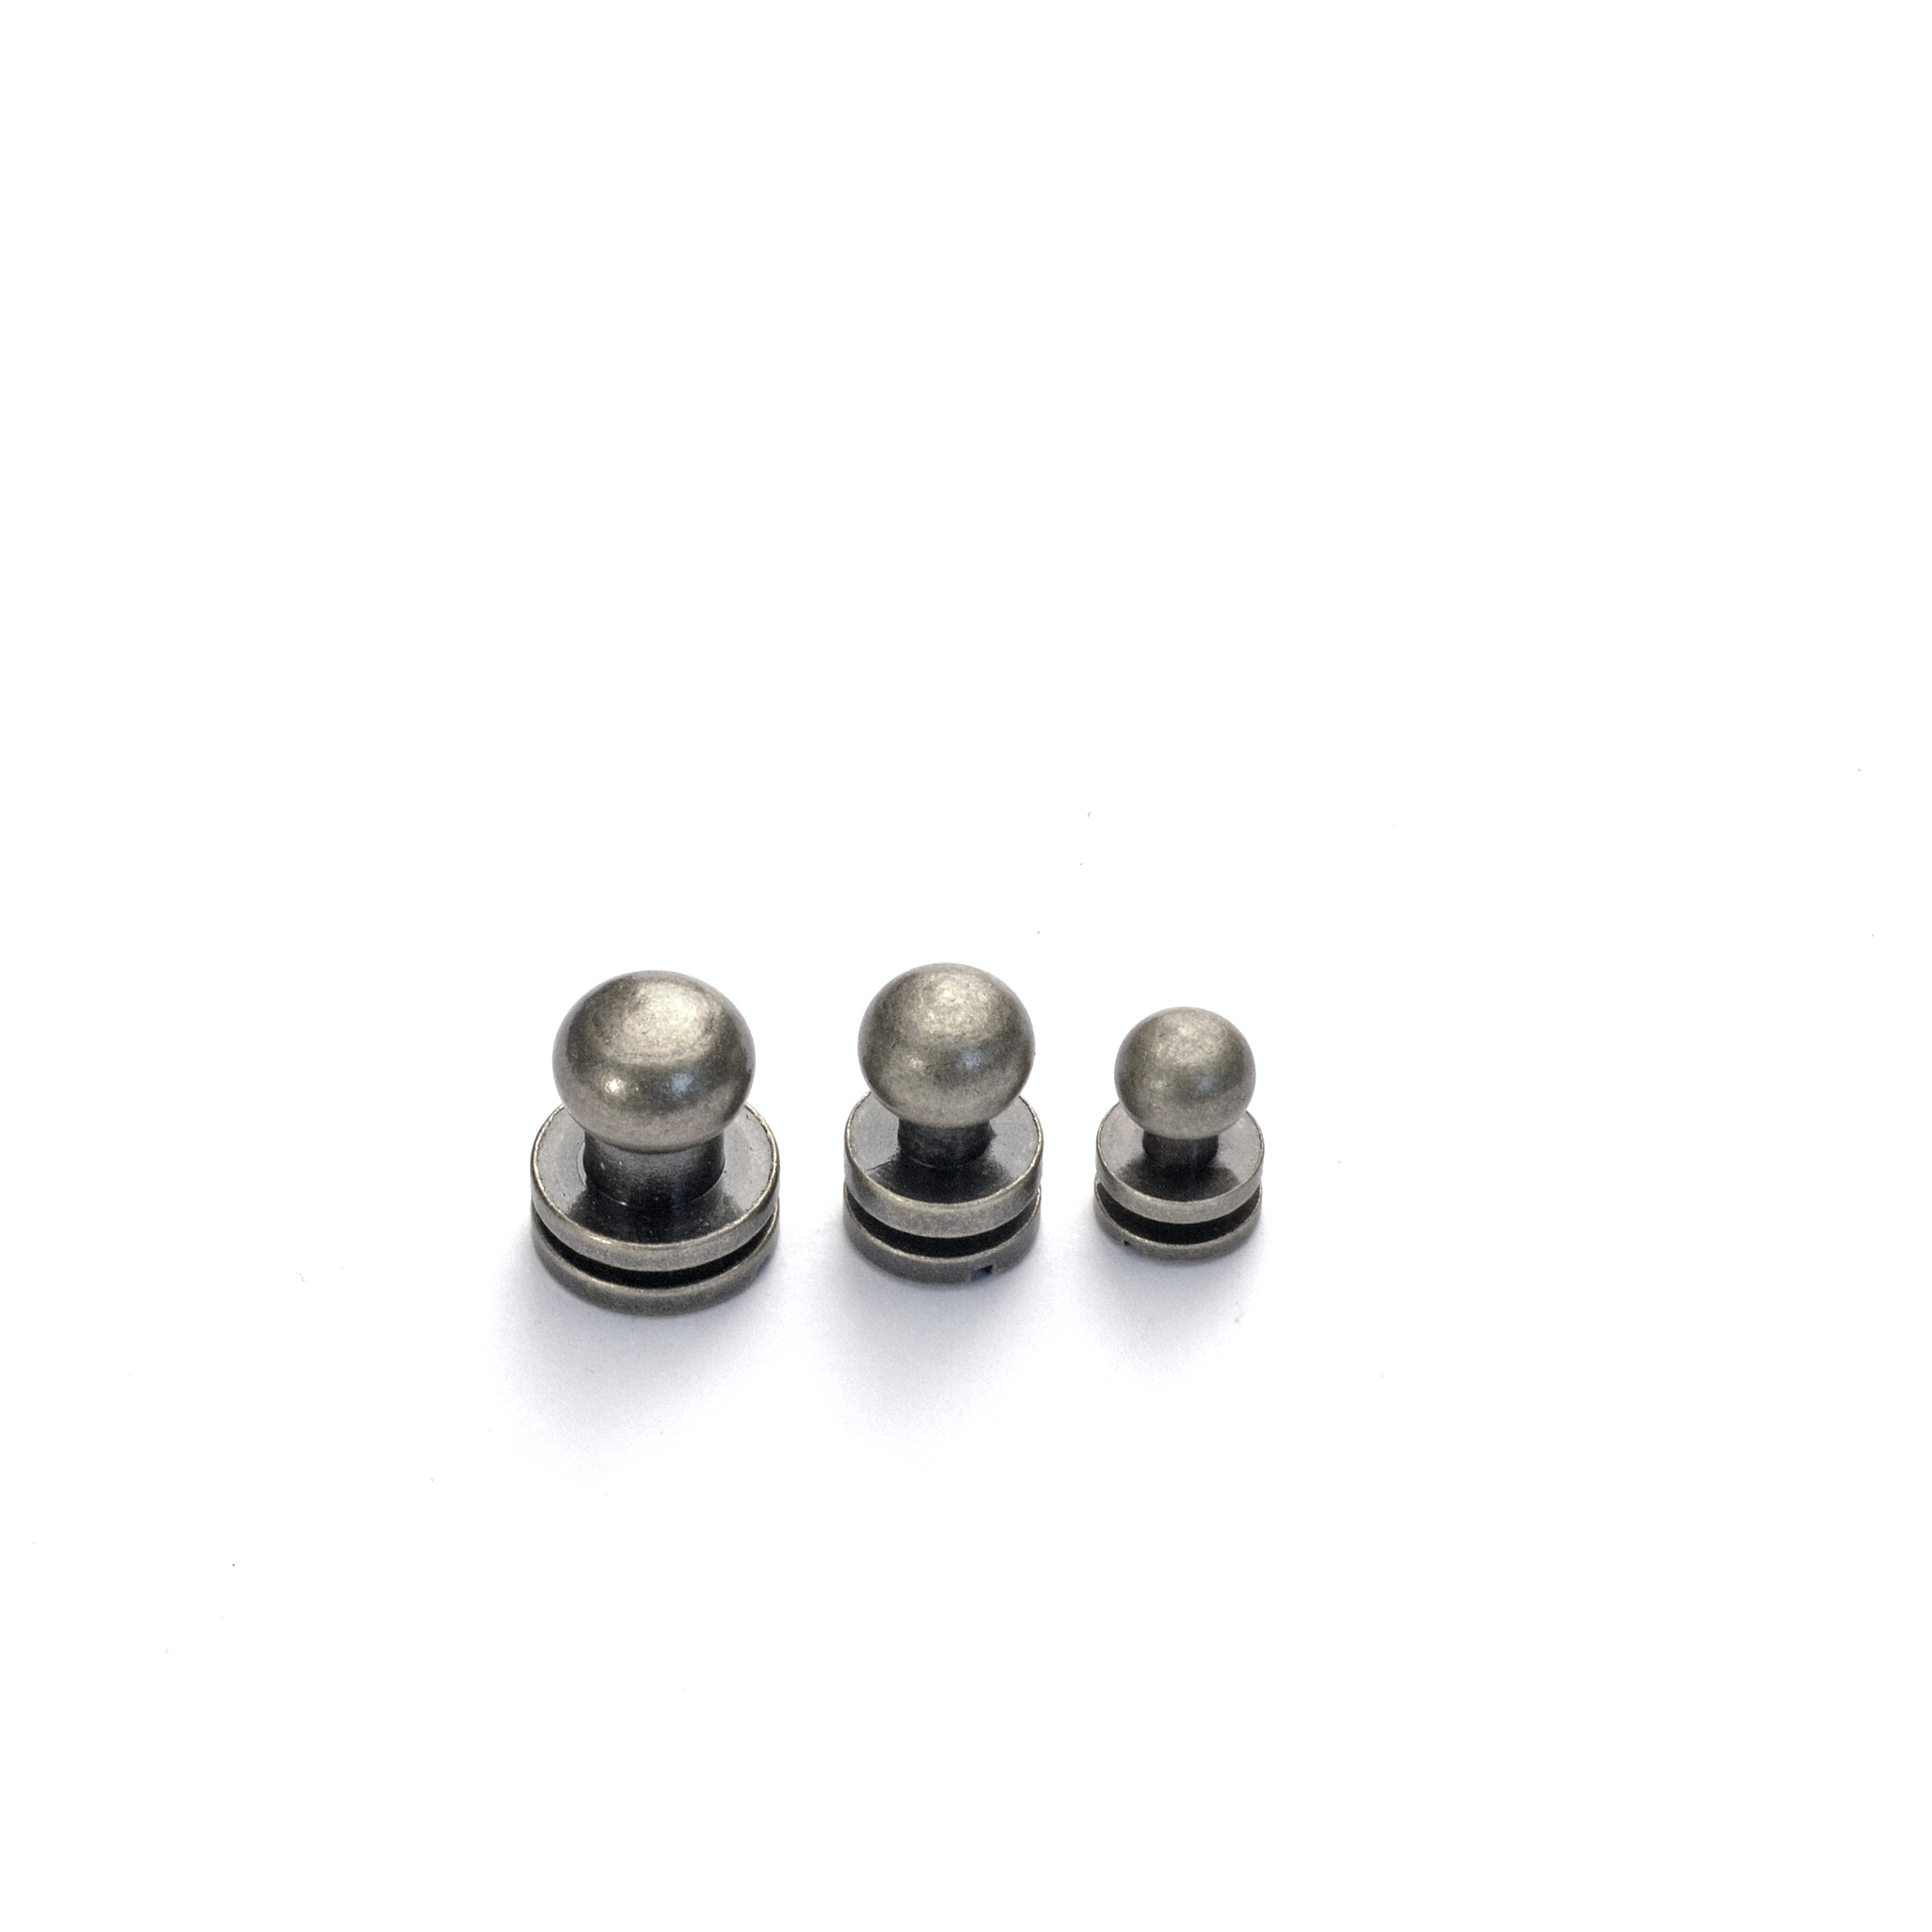 Antique Nickel Button Stud (Sam Browne) from Identity Leathercraft